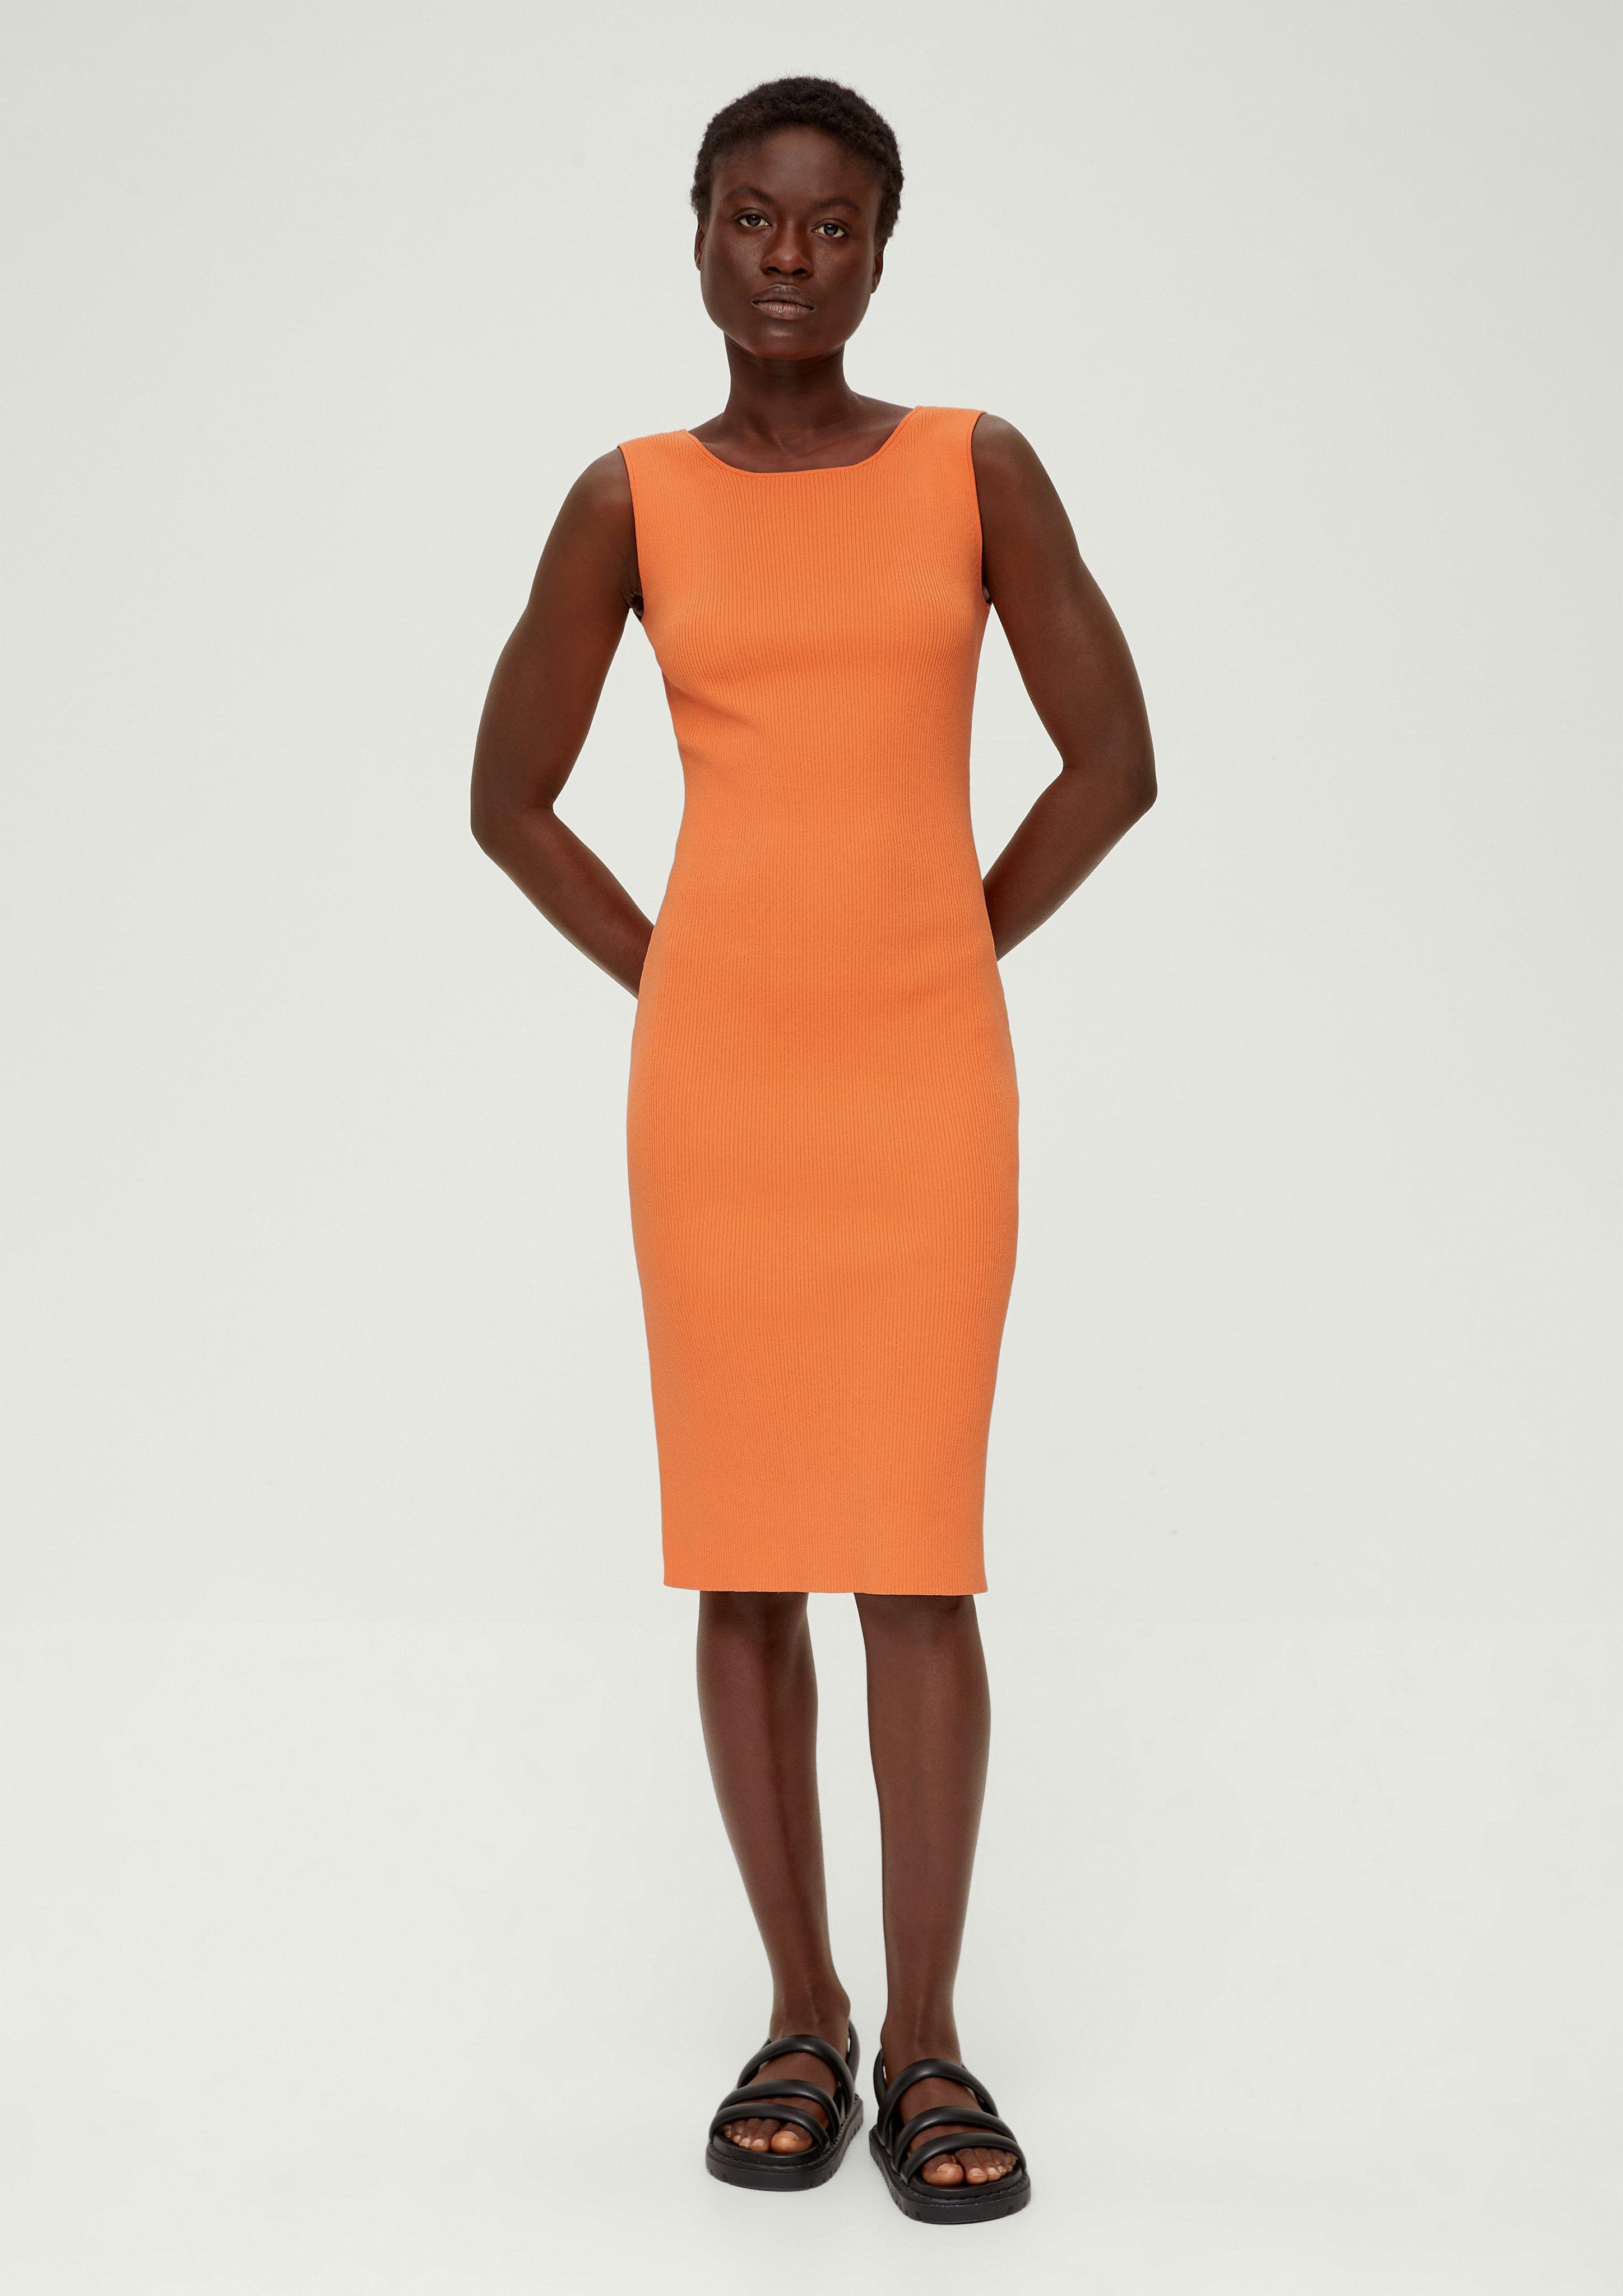 Sheath dress with a cut-out back - orange the at